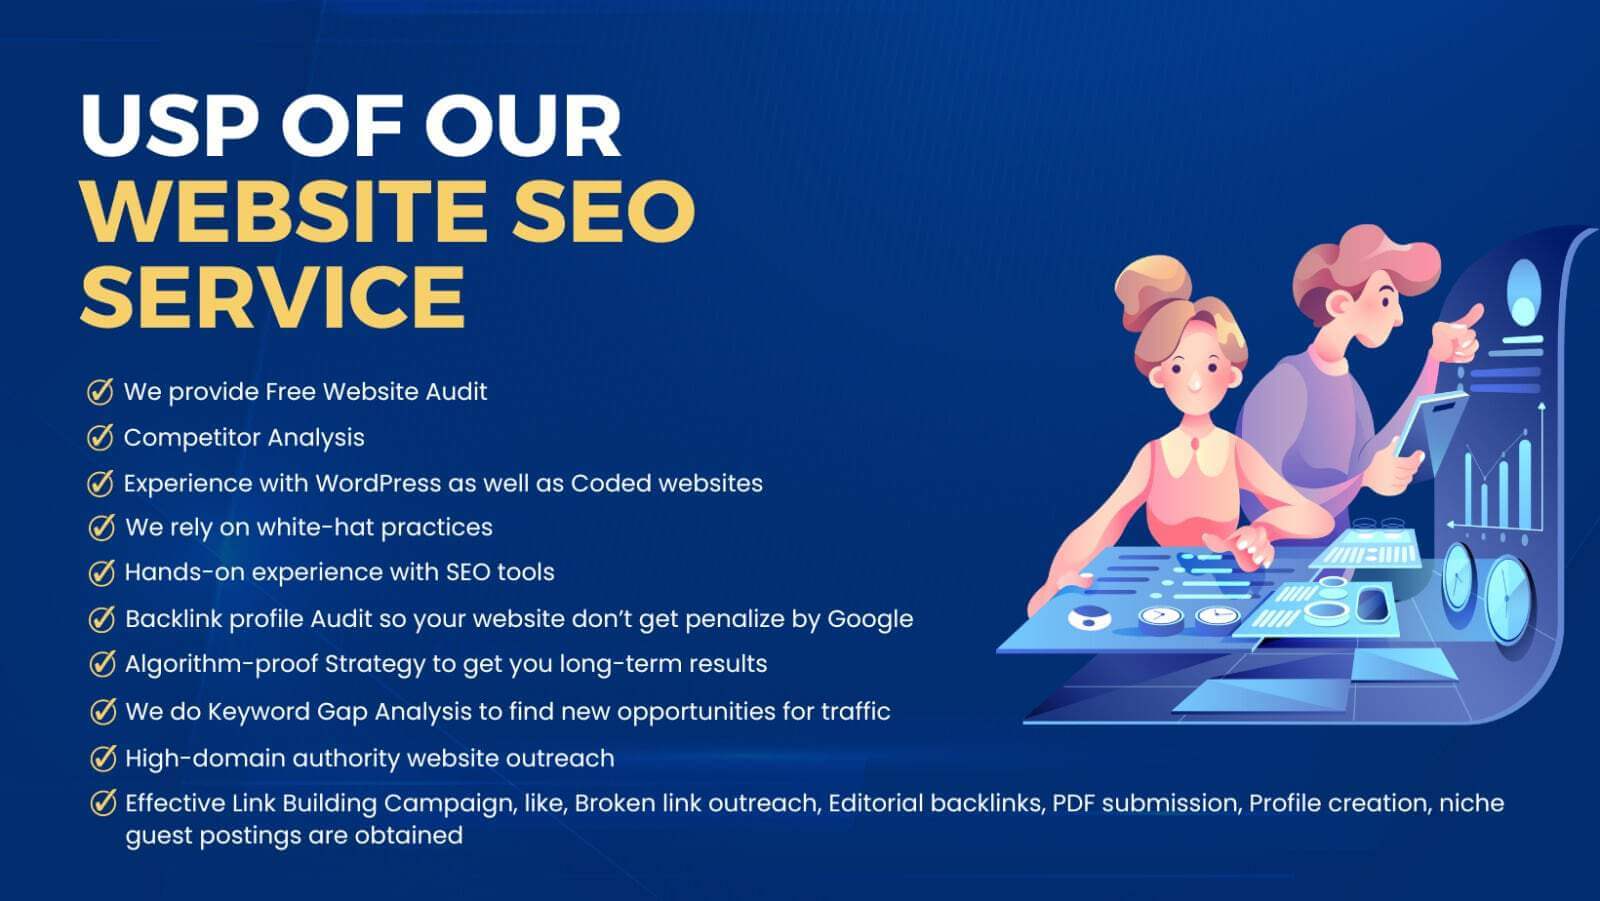 How We Help in Achieving Your SEO Goals